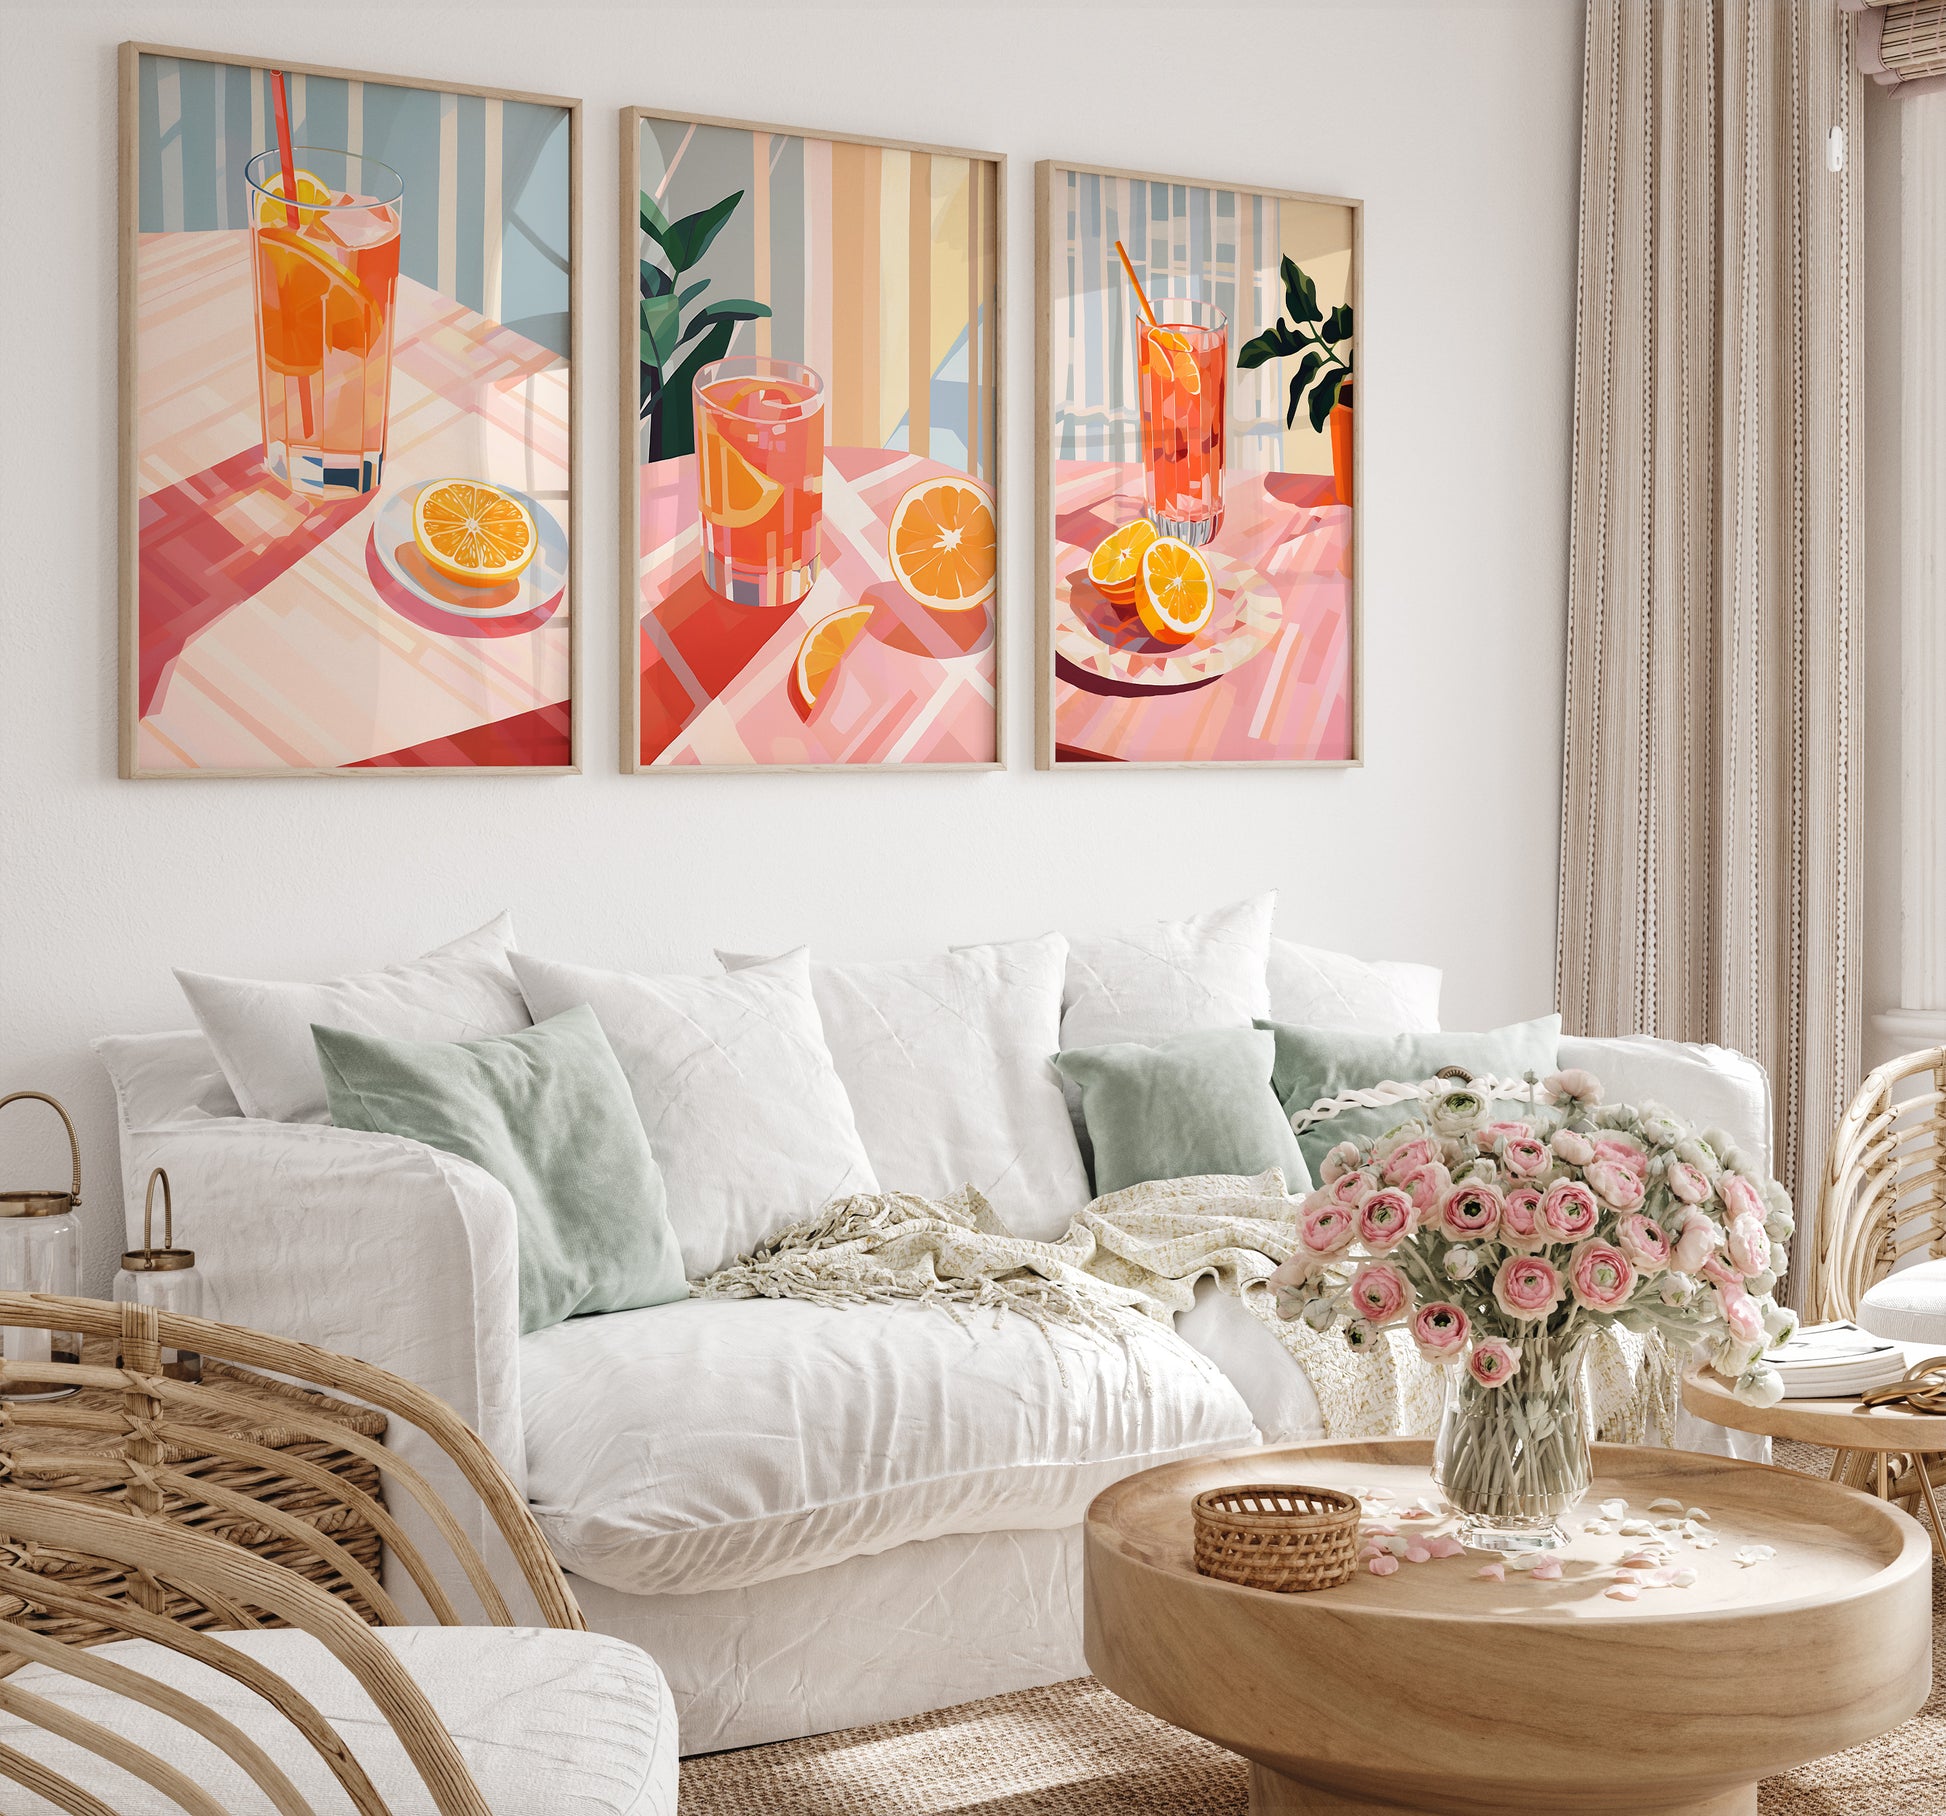 Three citrus-themed art pieces above a cozy sofa in a well-decorated living room.